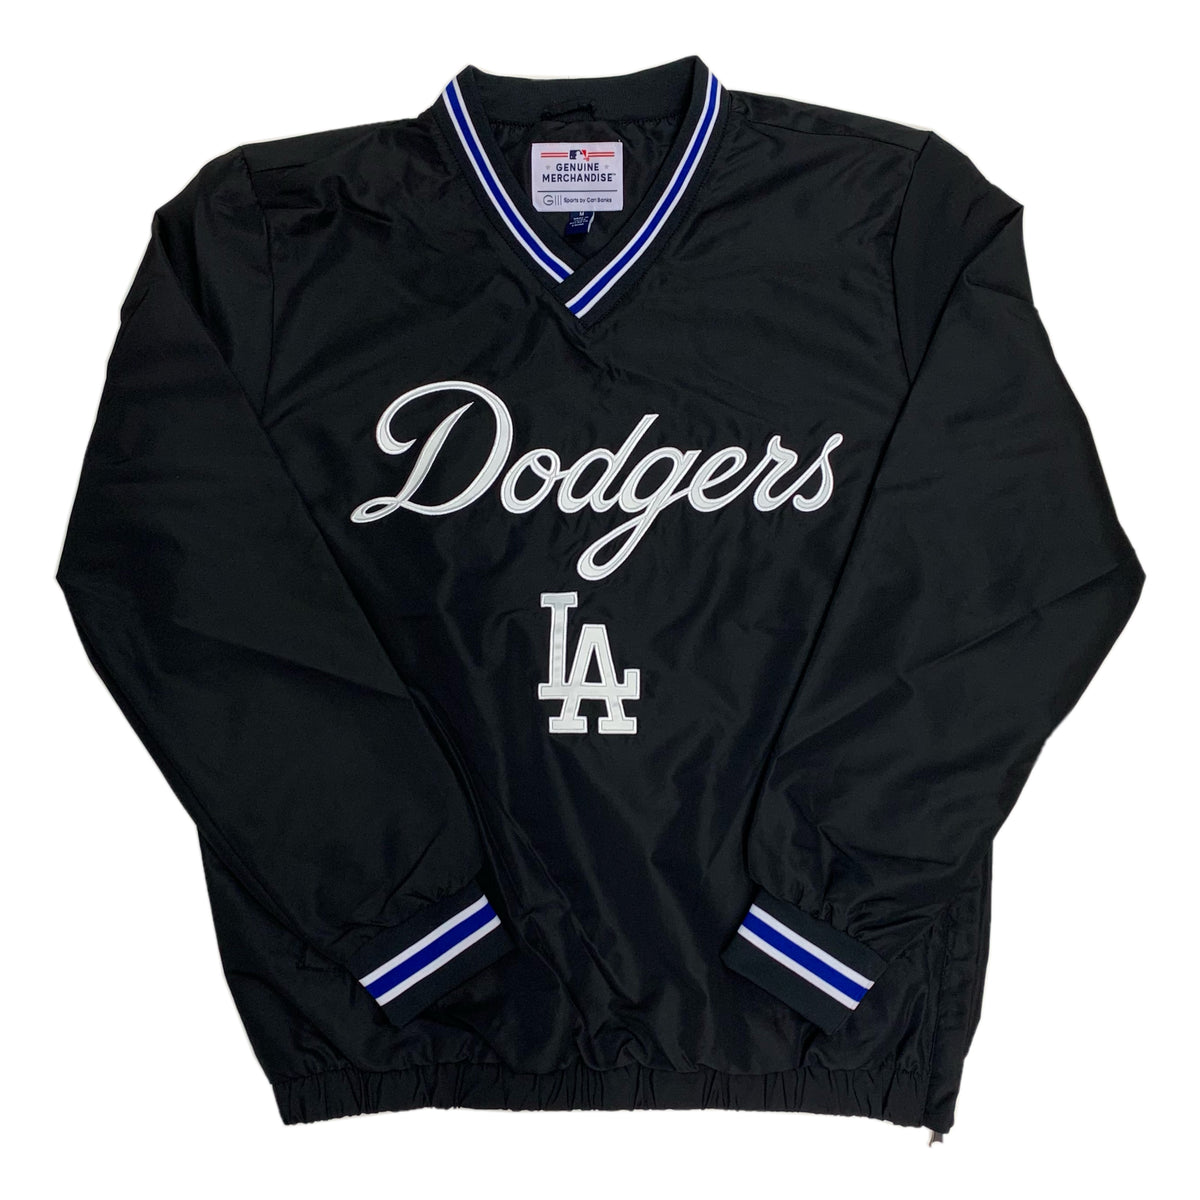 L.A Dodgers Official 2022 MLB Jersey in White